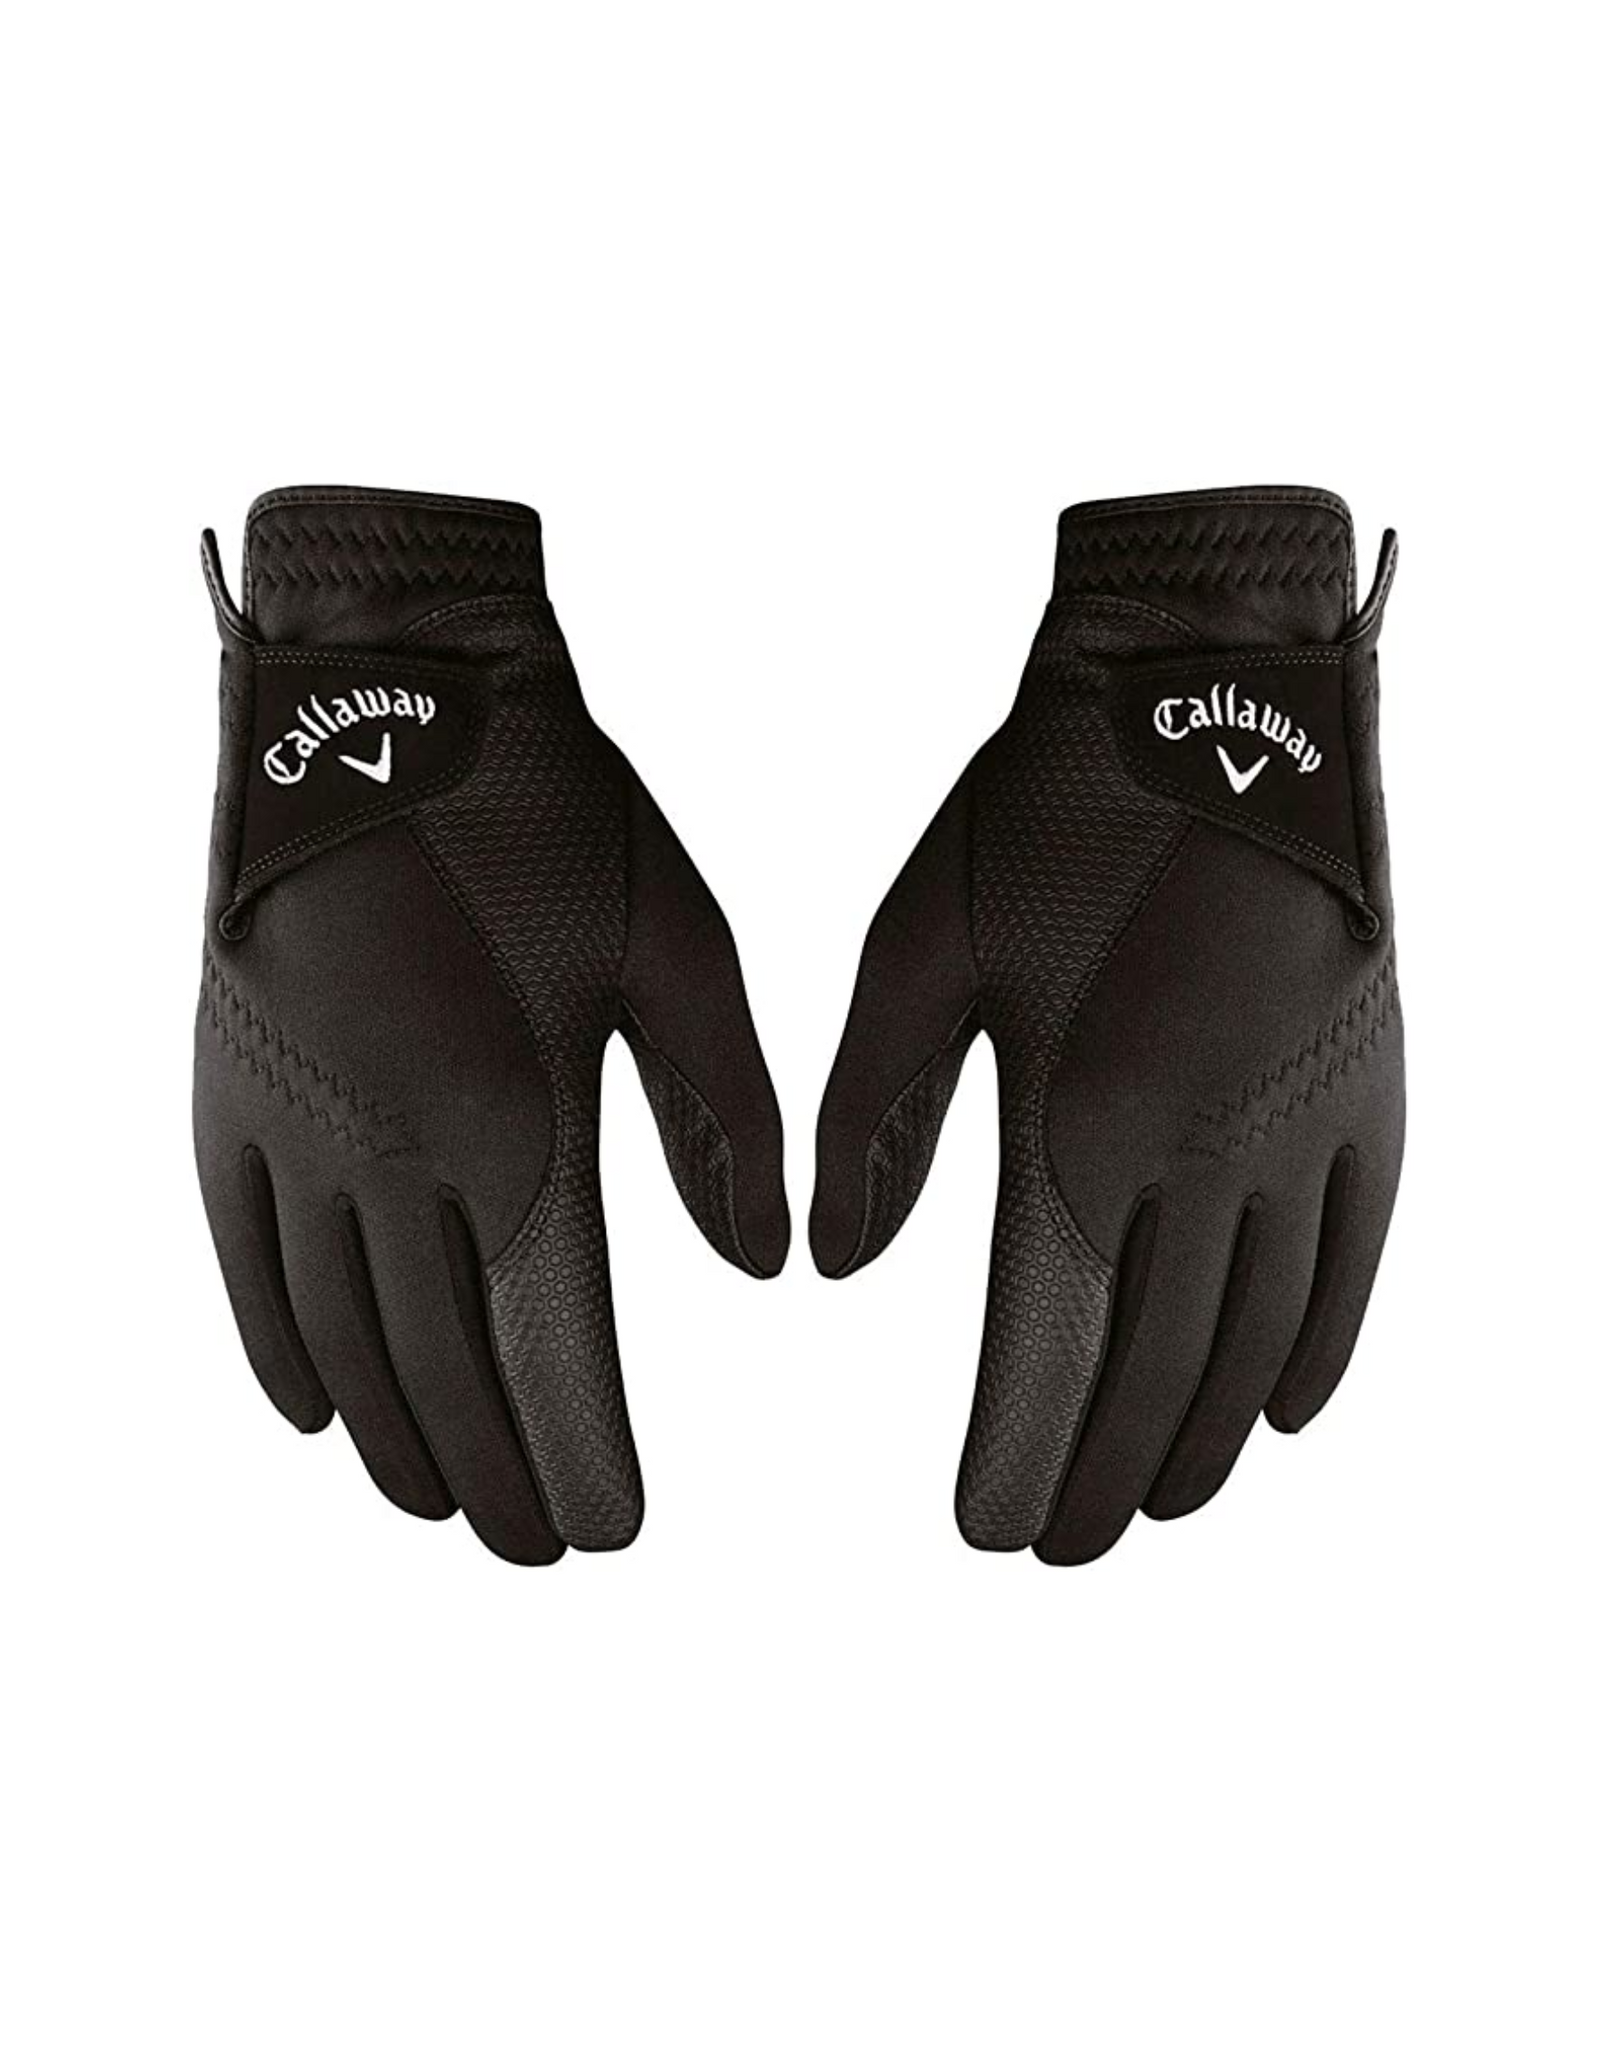 Callaway Golf Thermal Grip, Cold Weather Golf Gloves, Medium, Standard, 1 Pair (Left and Right)